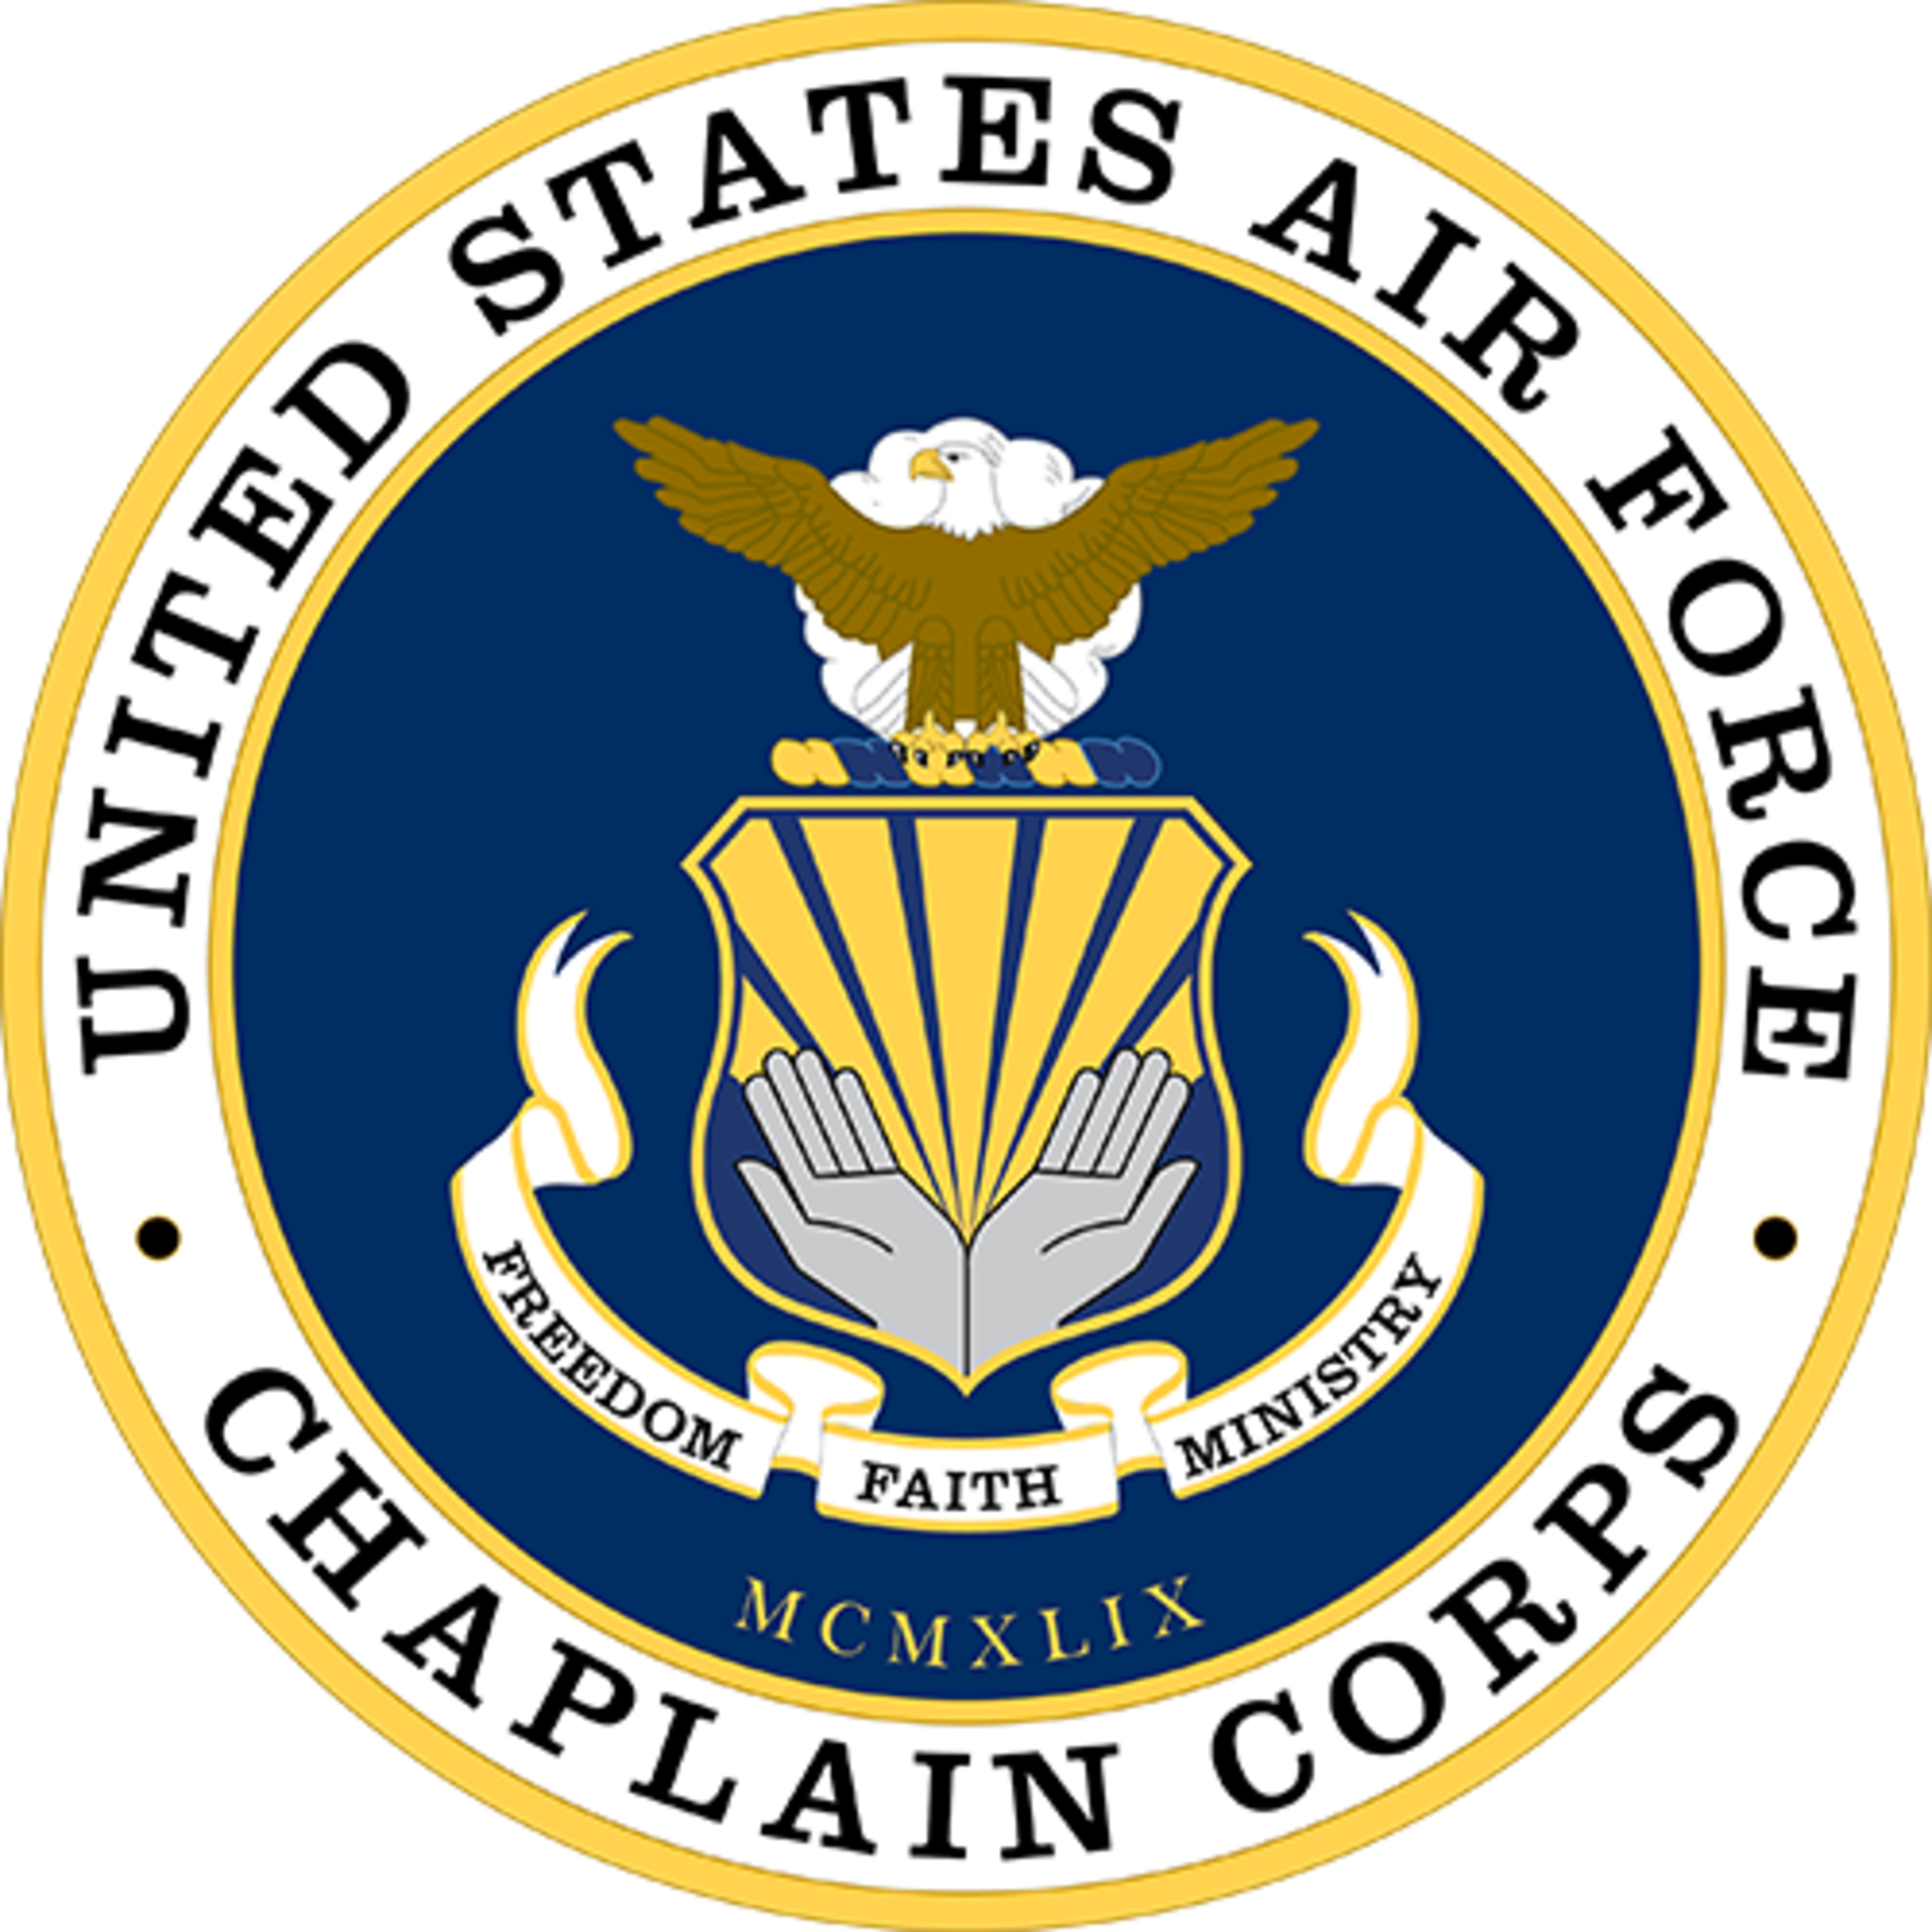 This is the seal for the U.S. Air Force Chaplain Corps.